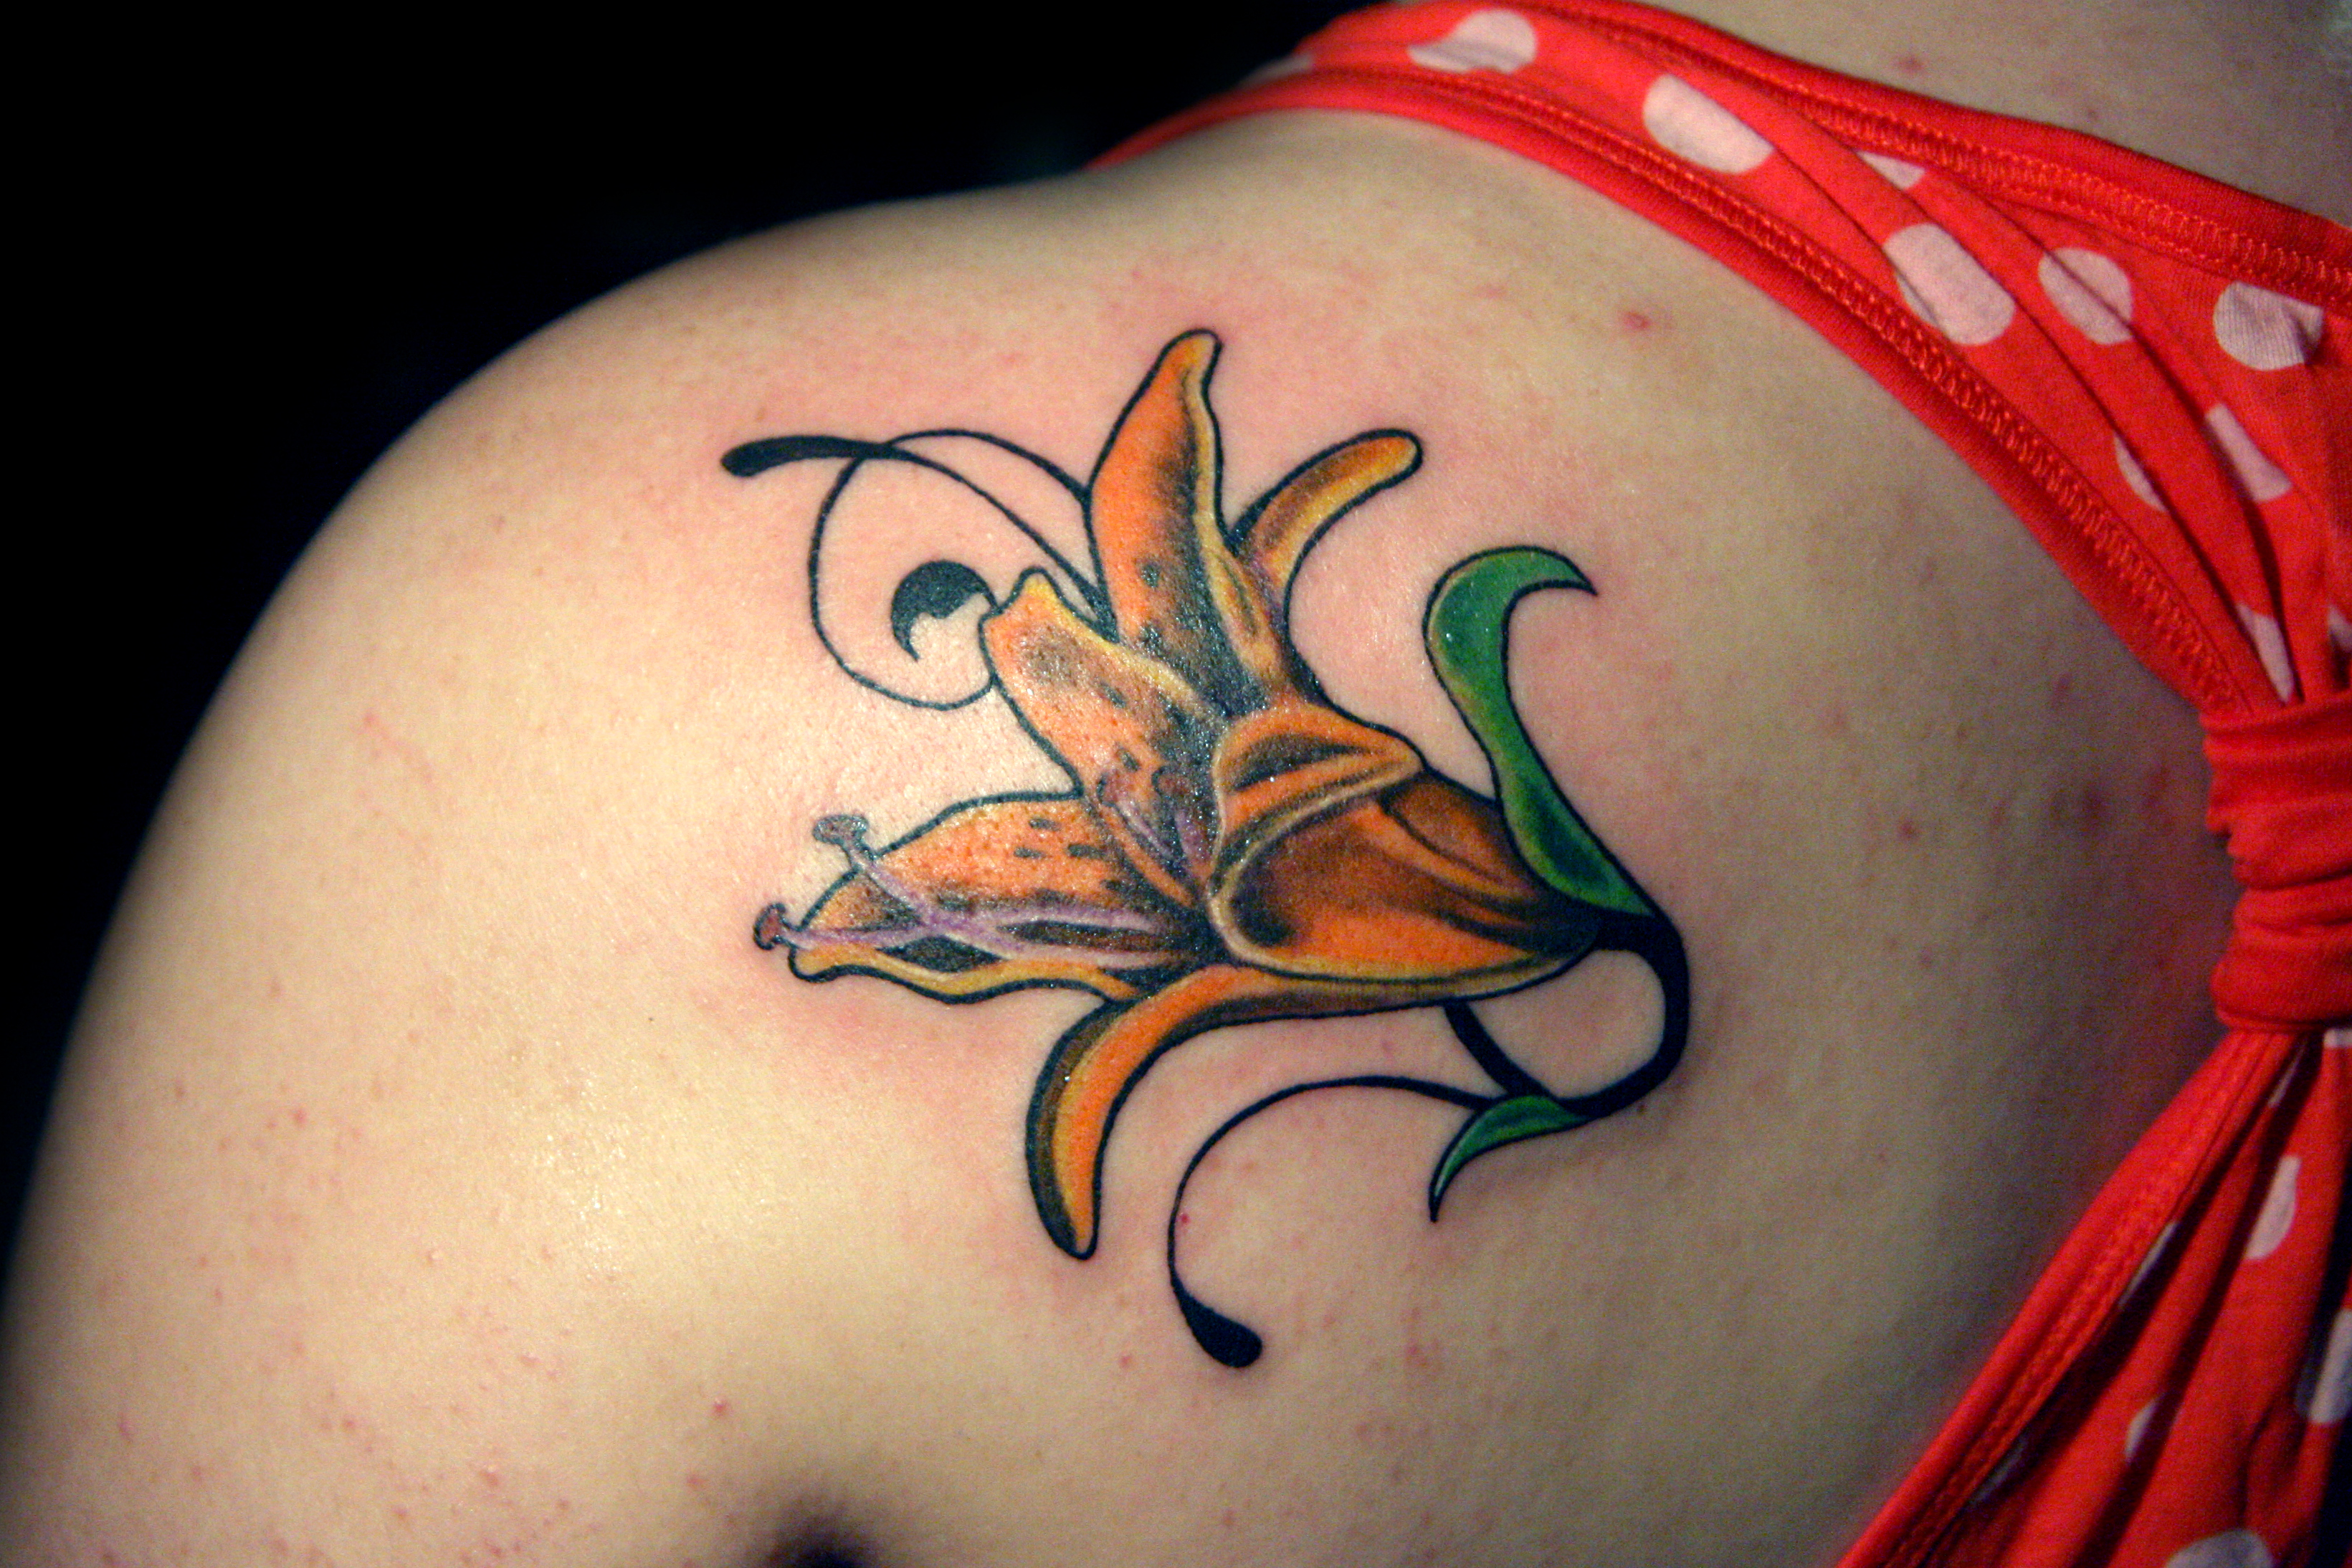 3. Lily Tattoo Meaning - wide 8